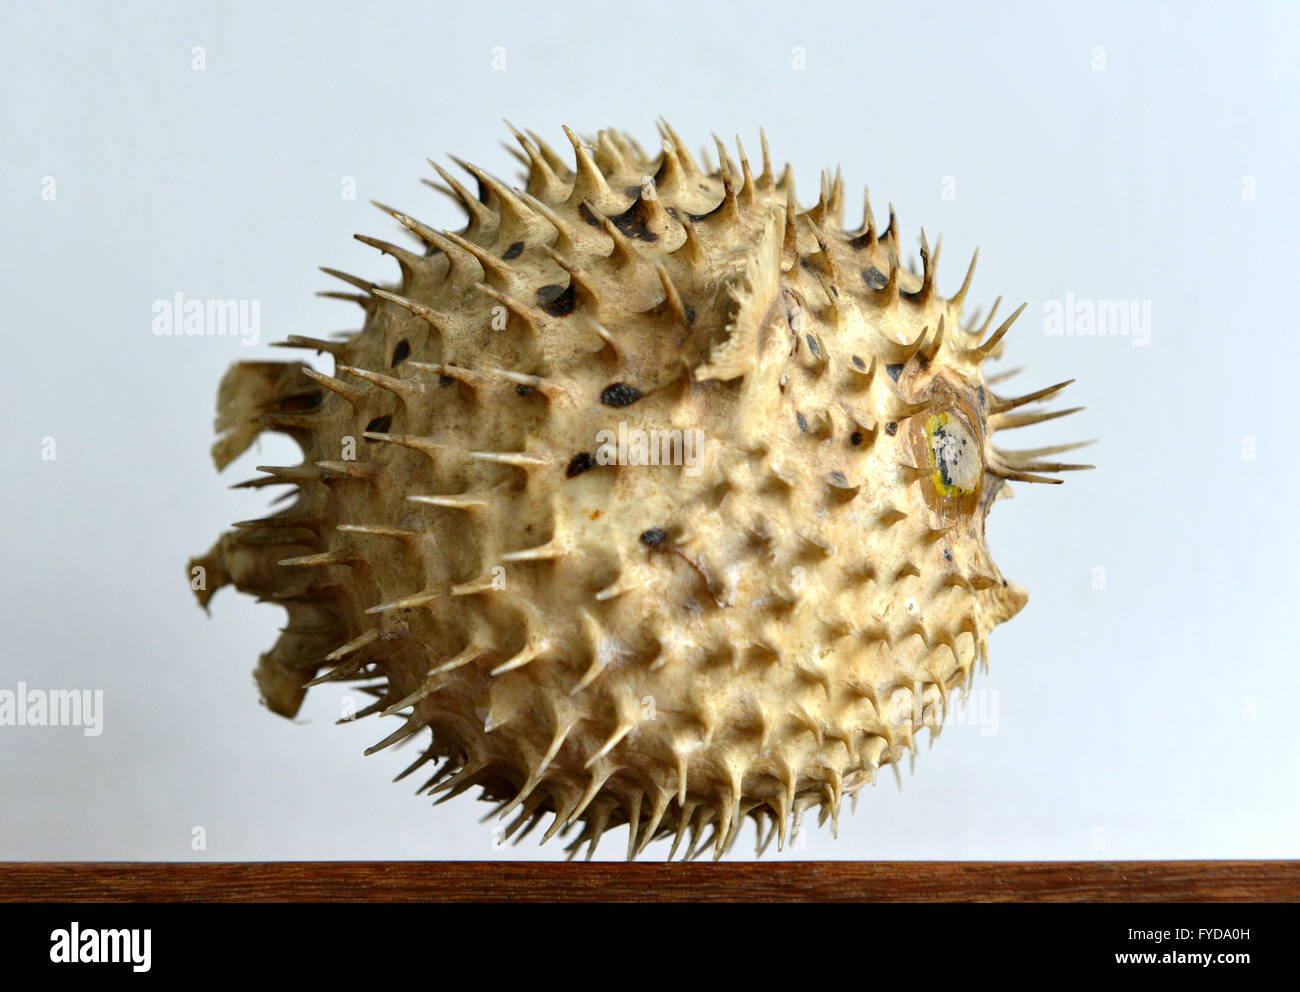 Dried and preserved antique puffer fish (tetraodontidae) specimen. Stock Photo